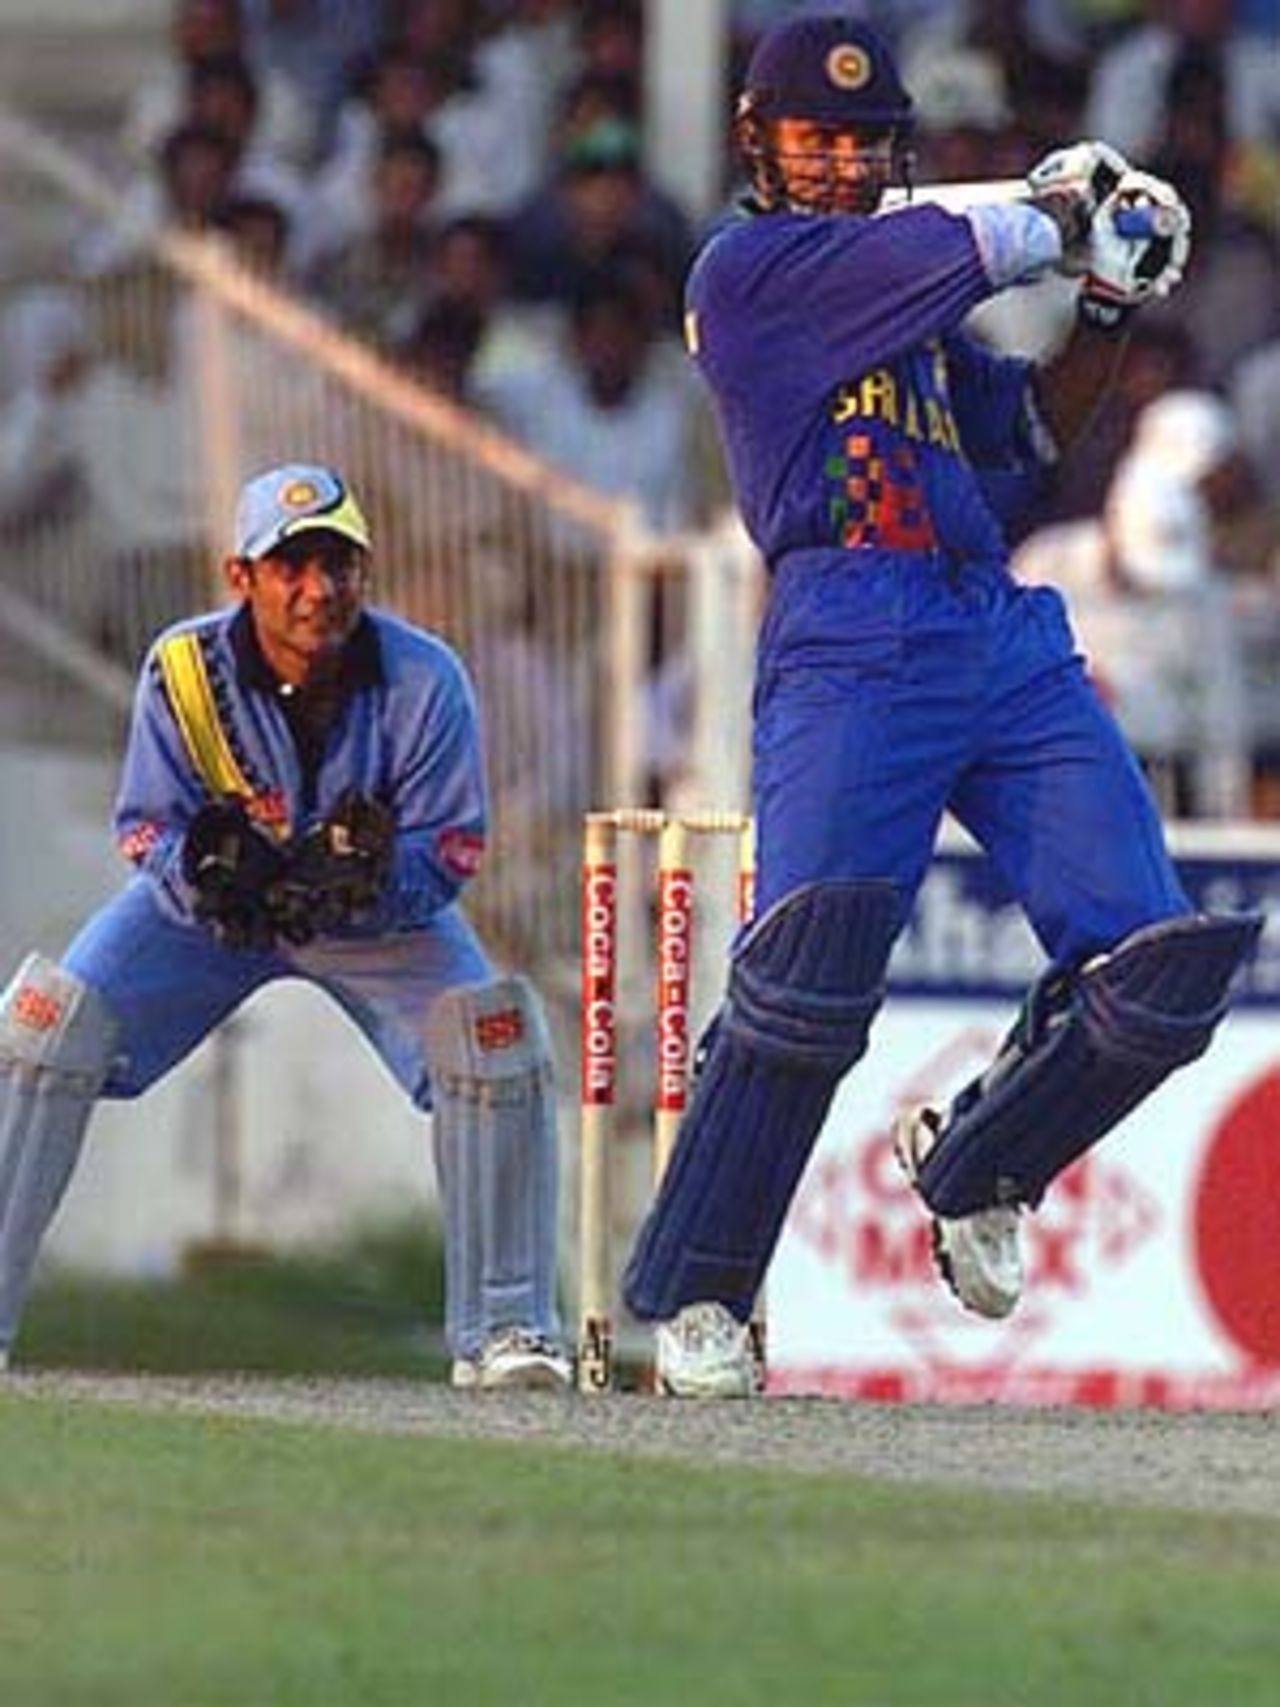 Atapattu forces the ball off the back foot as Dahiya watches keenly, Coca-Cola Champions Trophy, 2000/01, 6th Match, India v Sri Lanka, Sharjah C.A. Stadium, 27 October 2000.